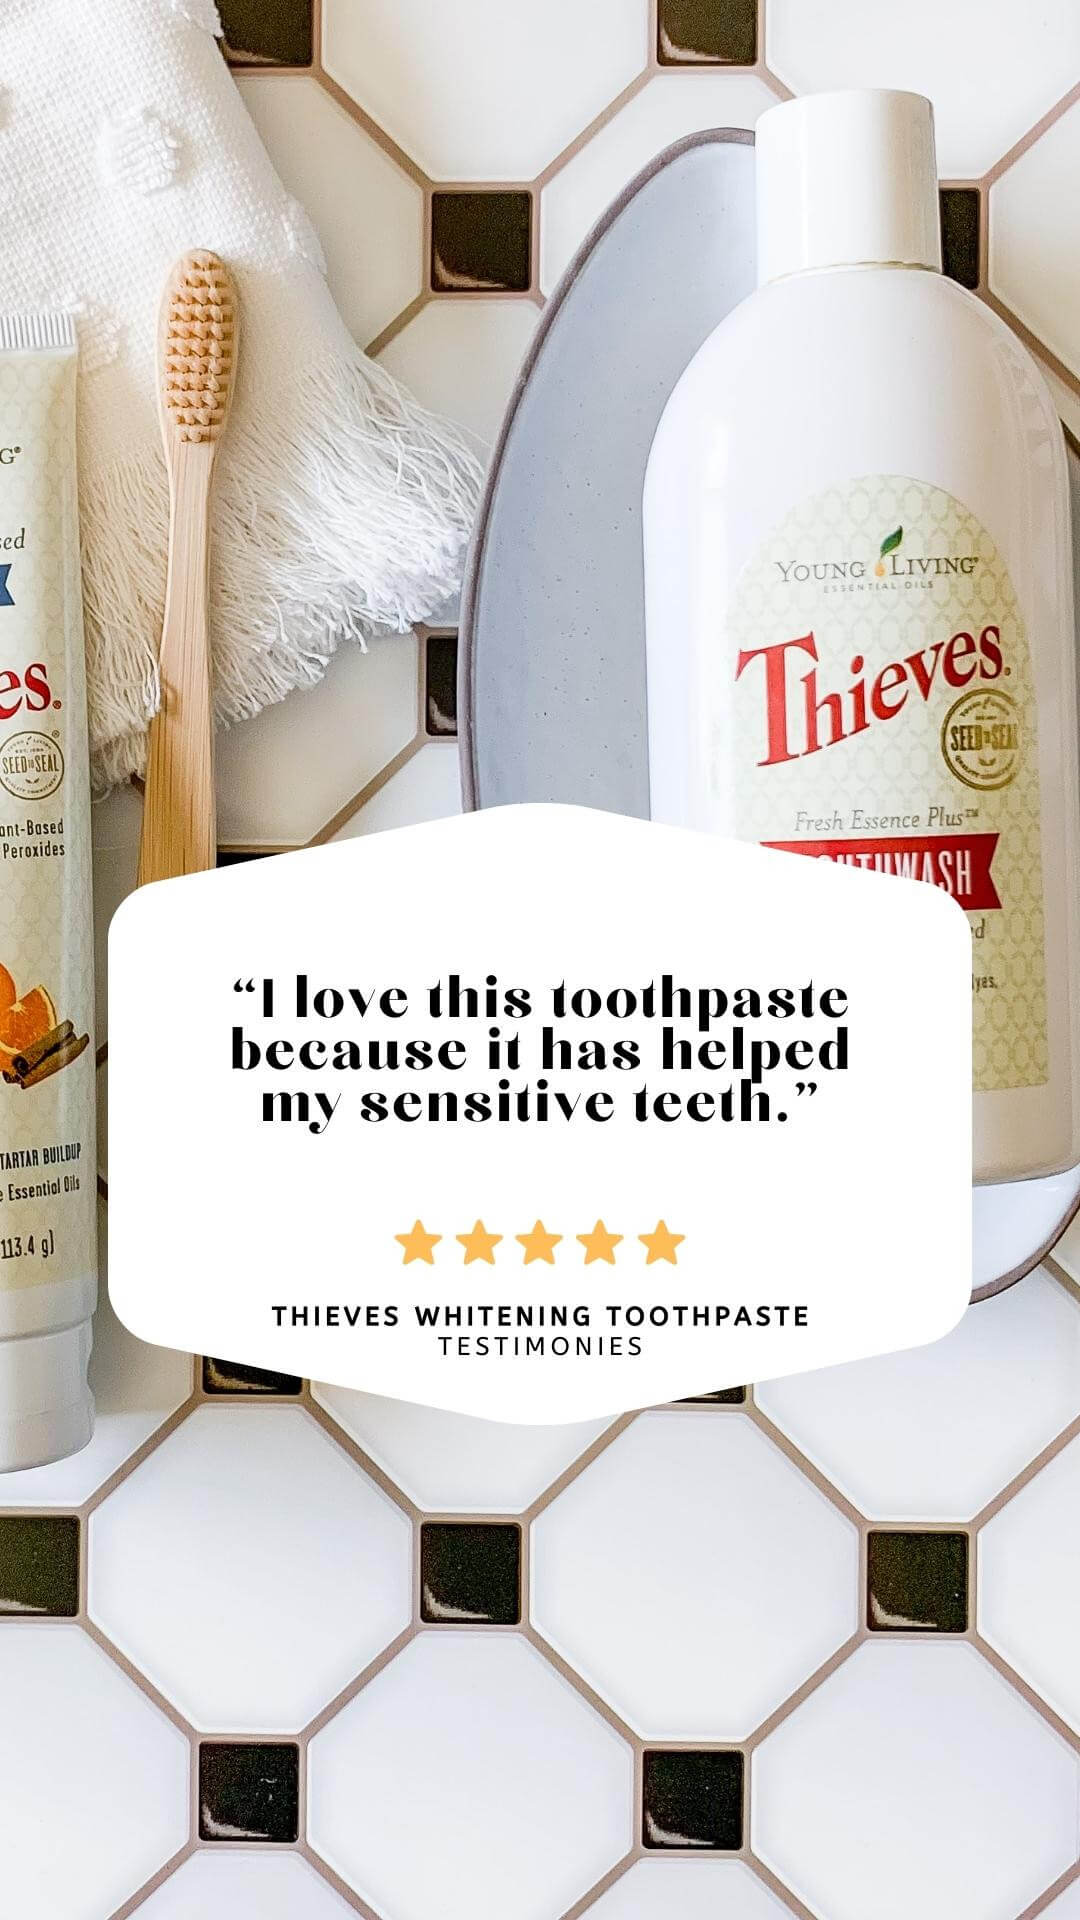 order thieves toothpaste with young living with a coupon code